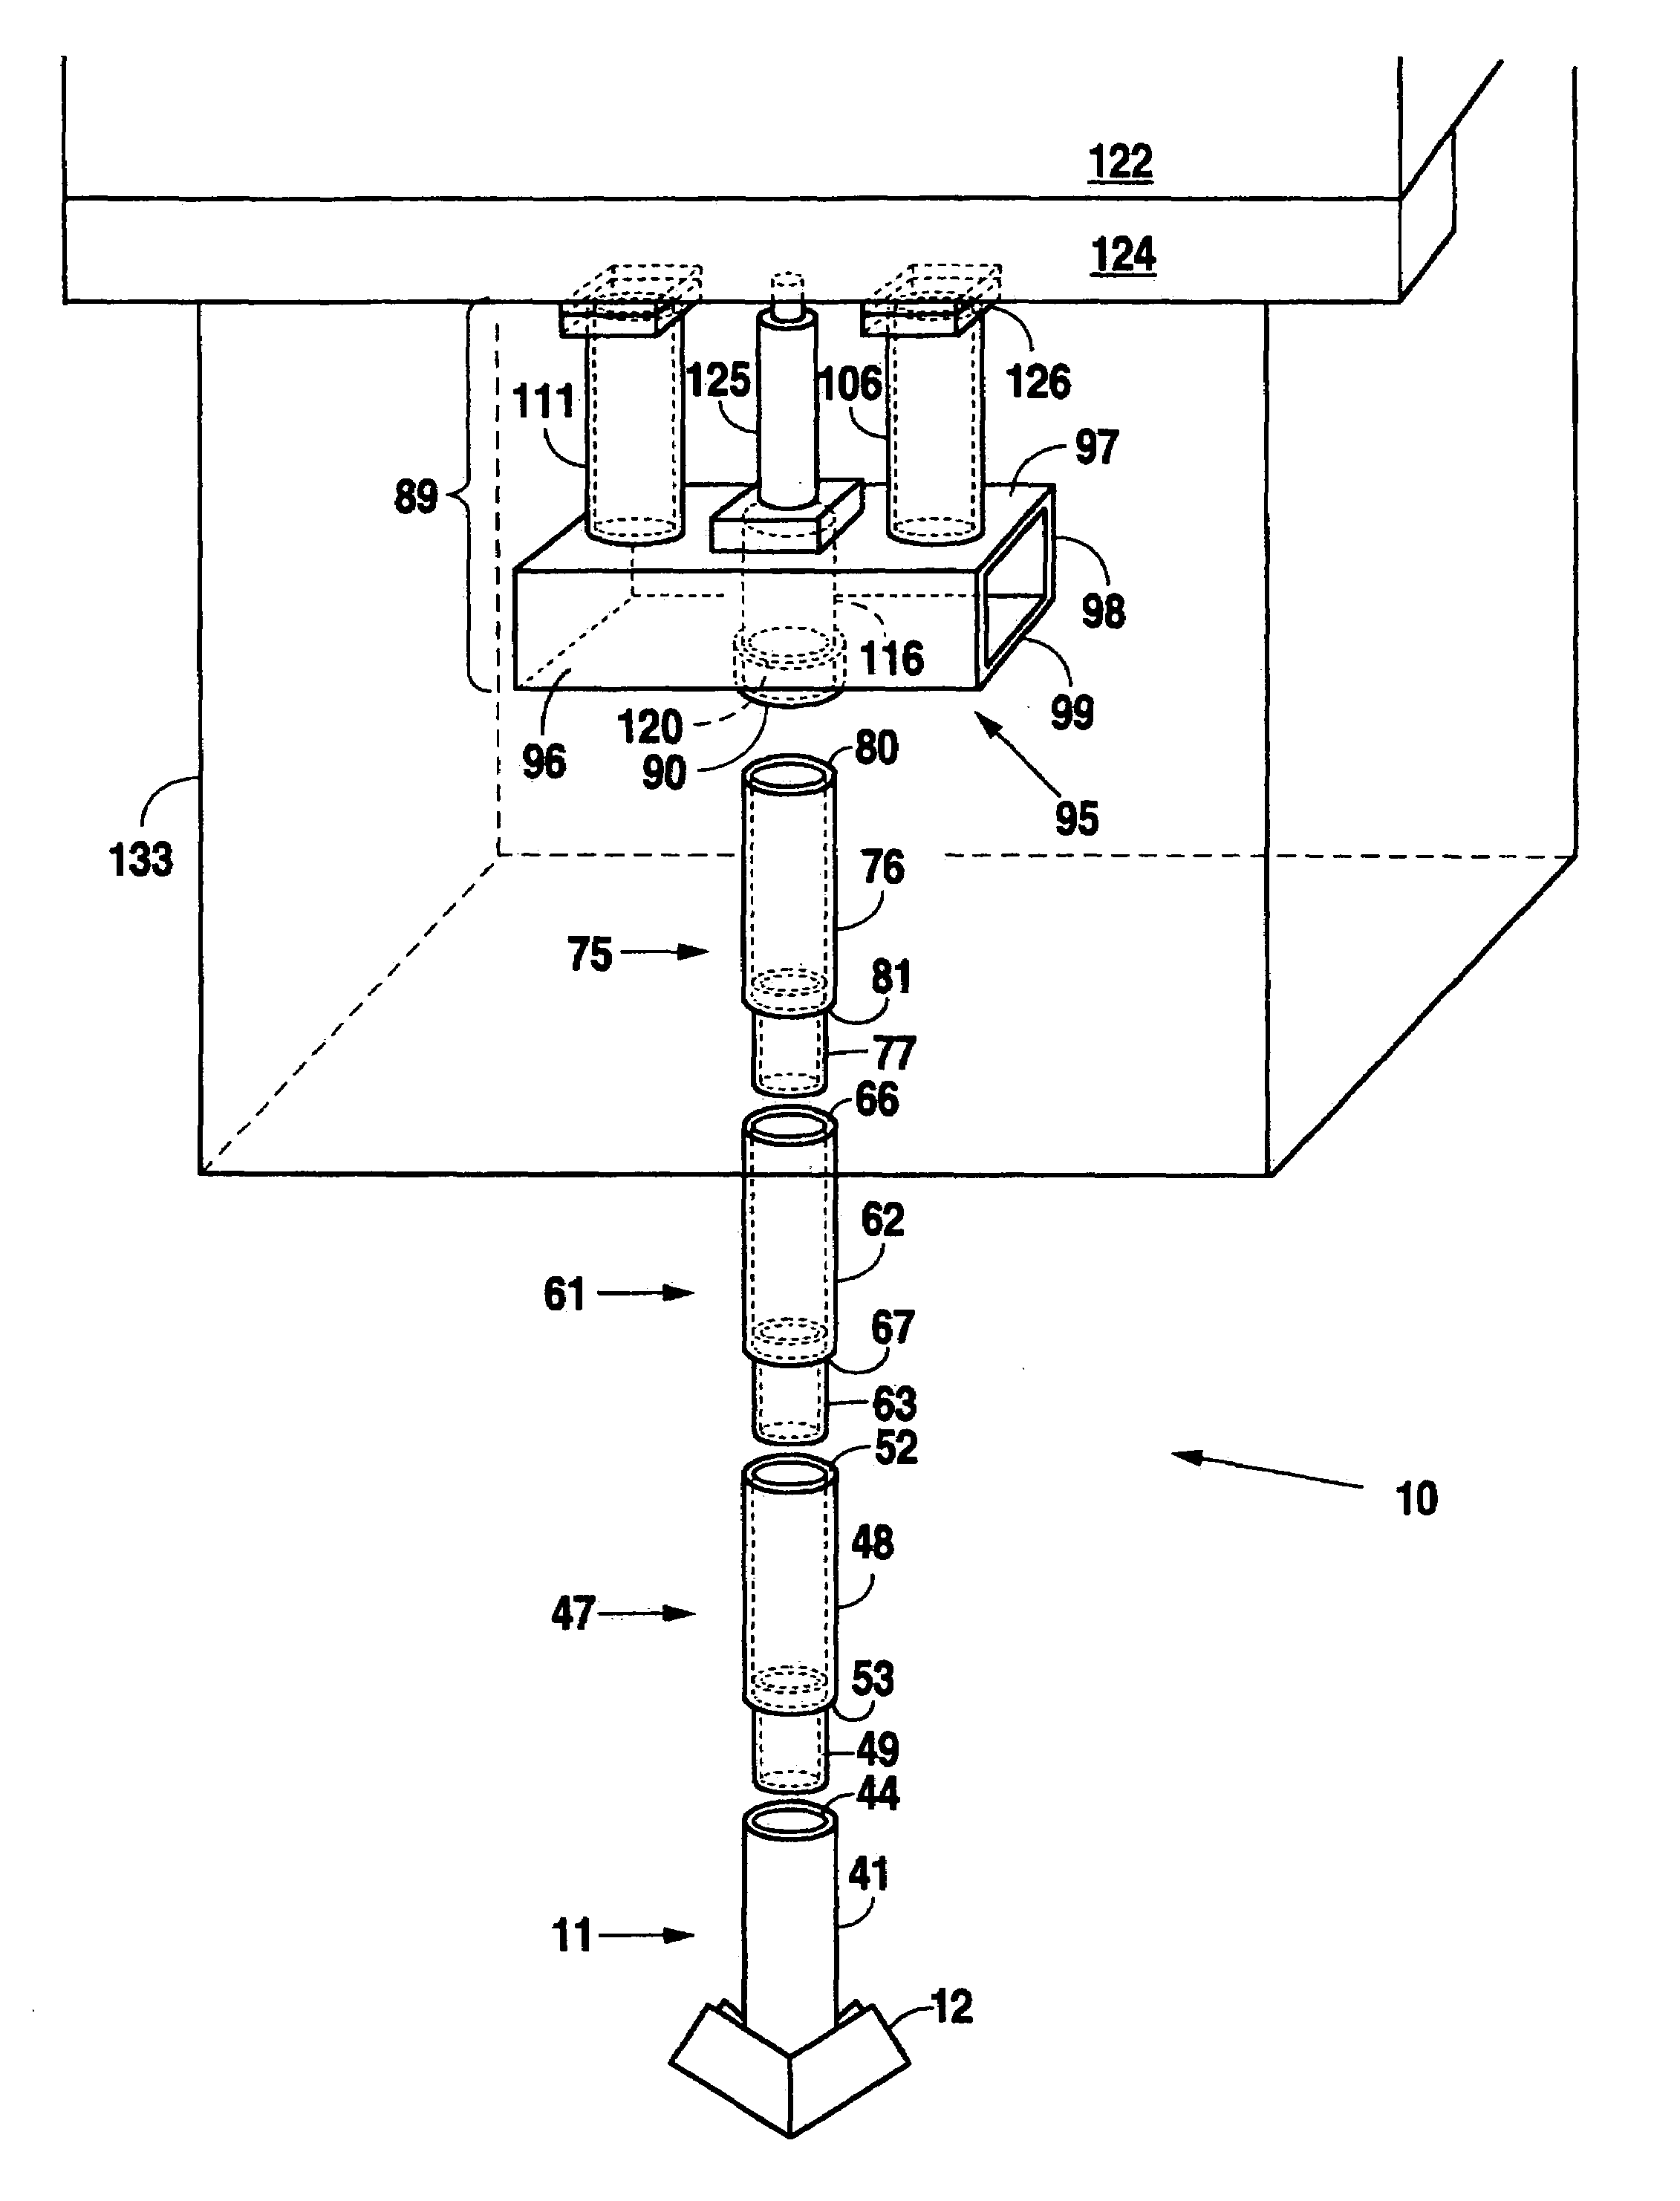 Method and apparatus for raising, leveling, and supporting displaced foundation allowing for readjustment after installation